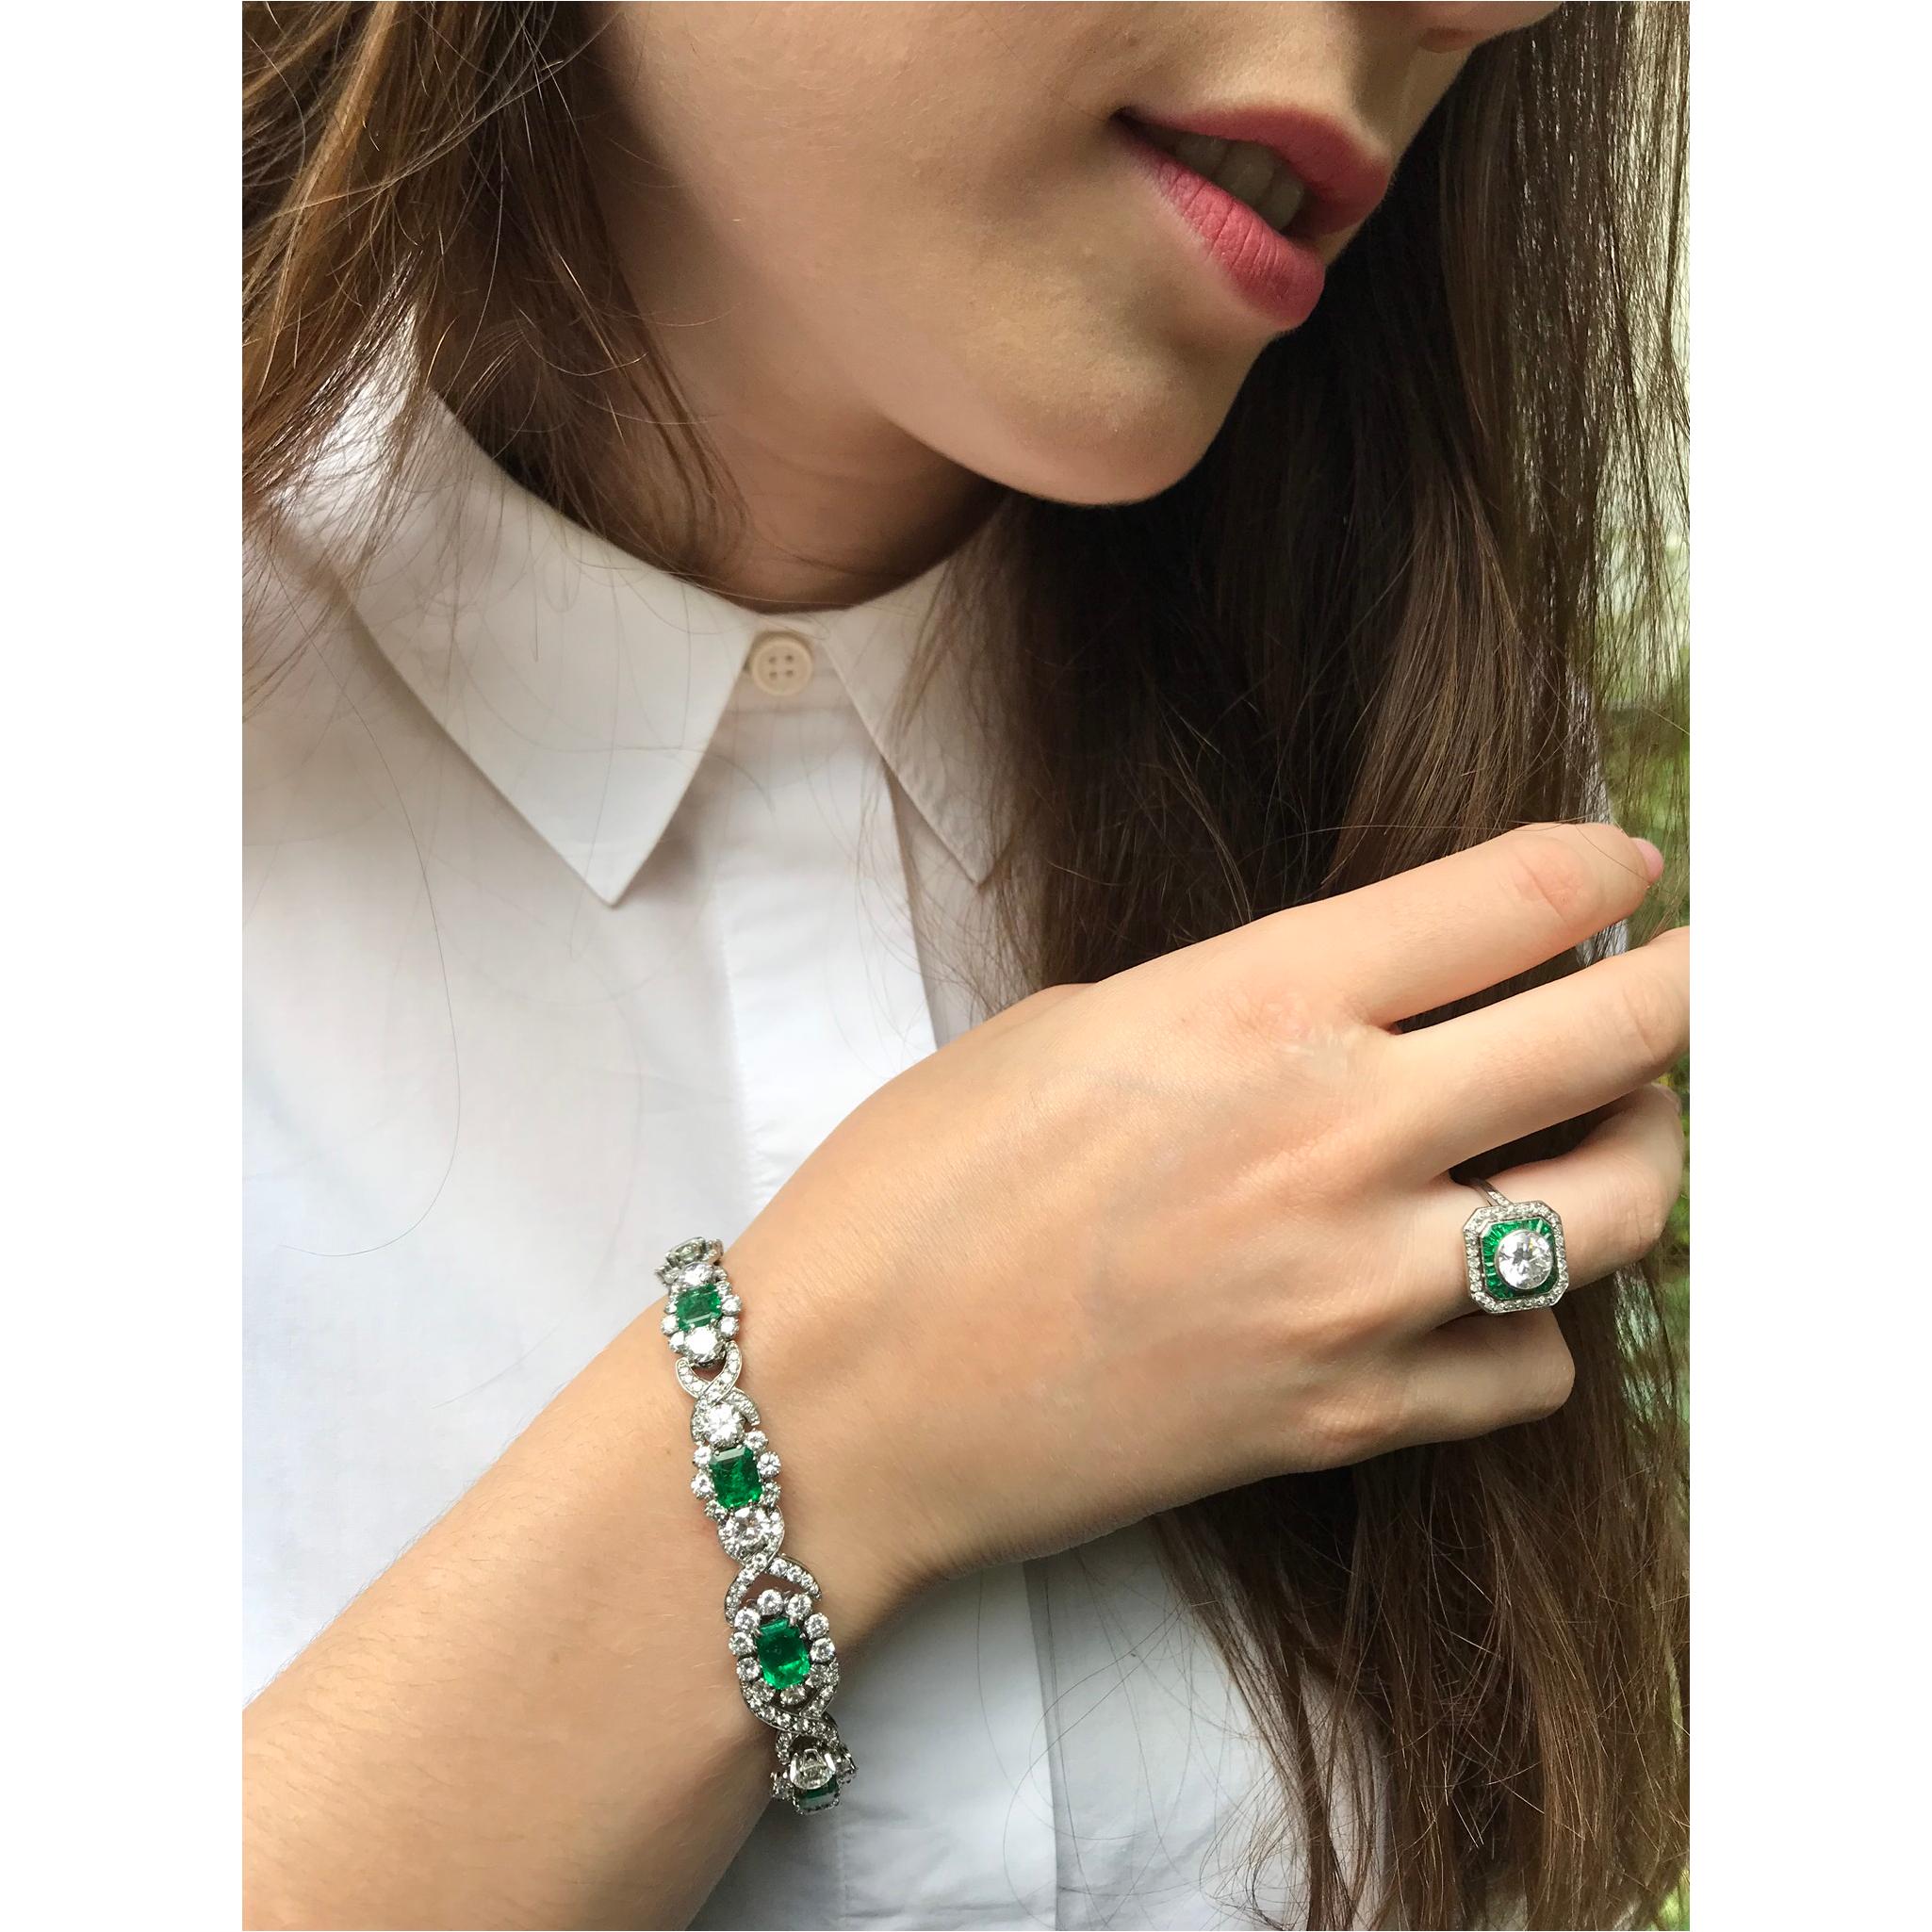 Through this magnificent 14K white gold Estate bracelet from 1950, a braid of 145 brilliant cut diamonds twists between nine degrading clusters of high quality brilliants and natural Colombian emeralds with a total weight of almost seven carats. On